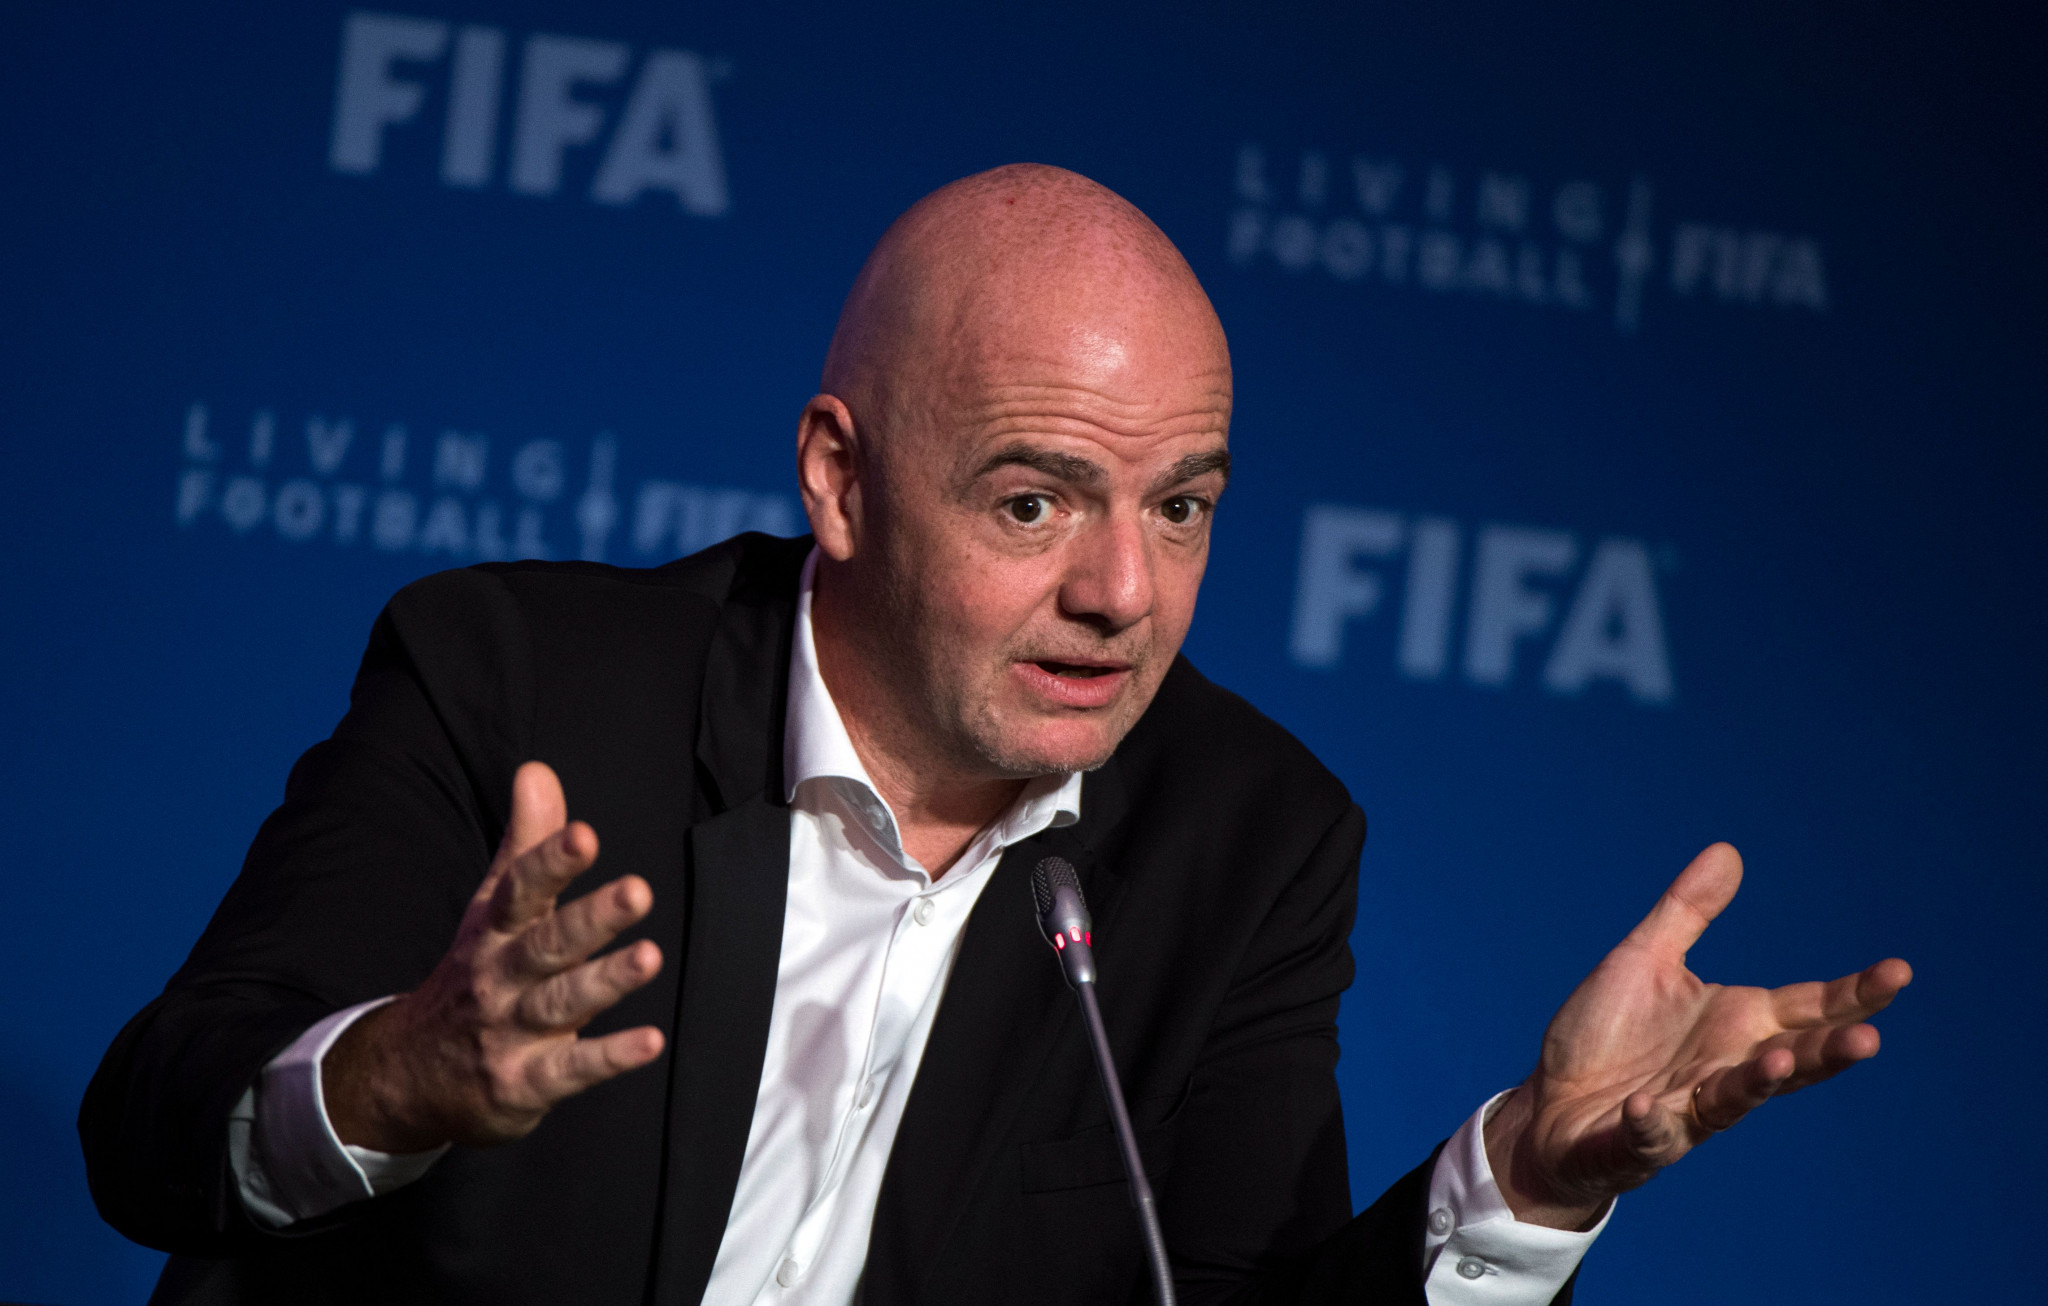 FIFA President Infantino claims strong support for 48-team World Cup in Qatar  